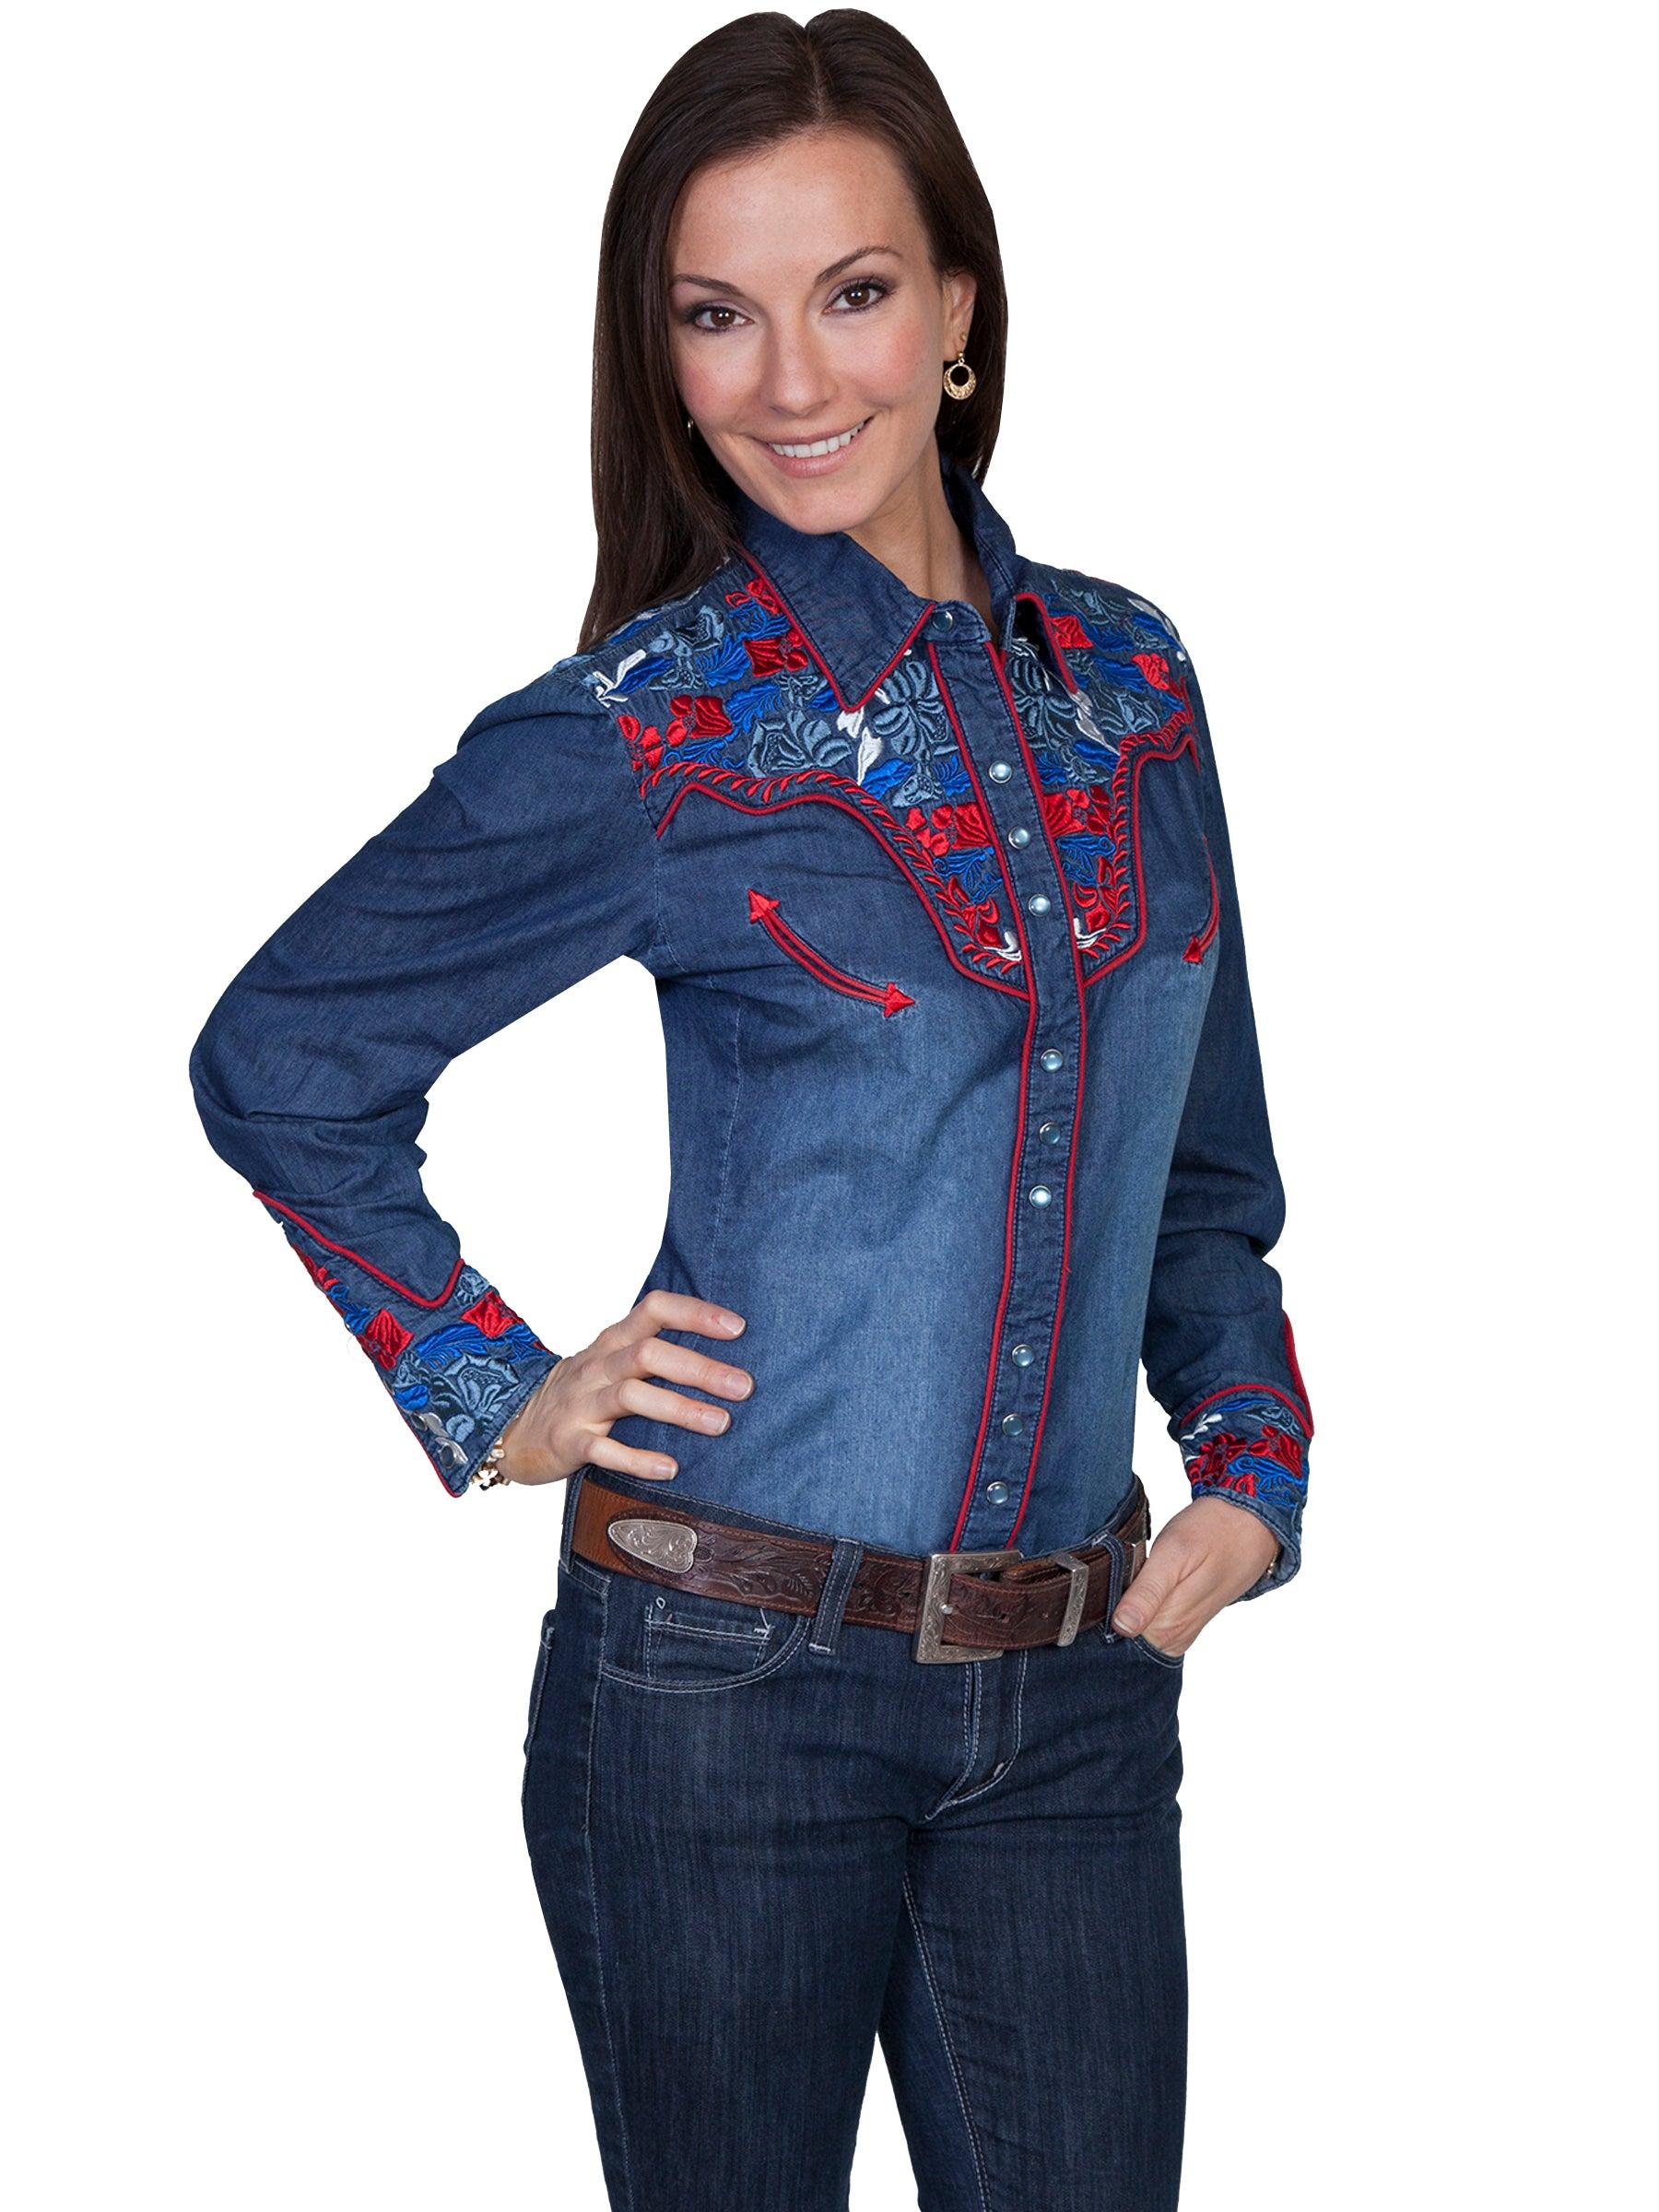 Scully DENIM COLORFUL FLORAL TOOLED EMBROIDERED SHIRT - Flyclothing LLC